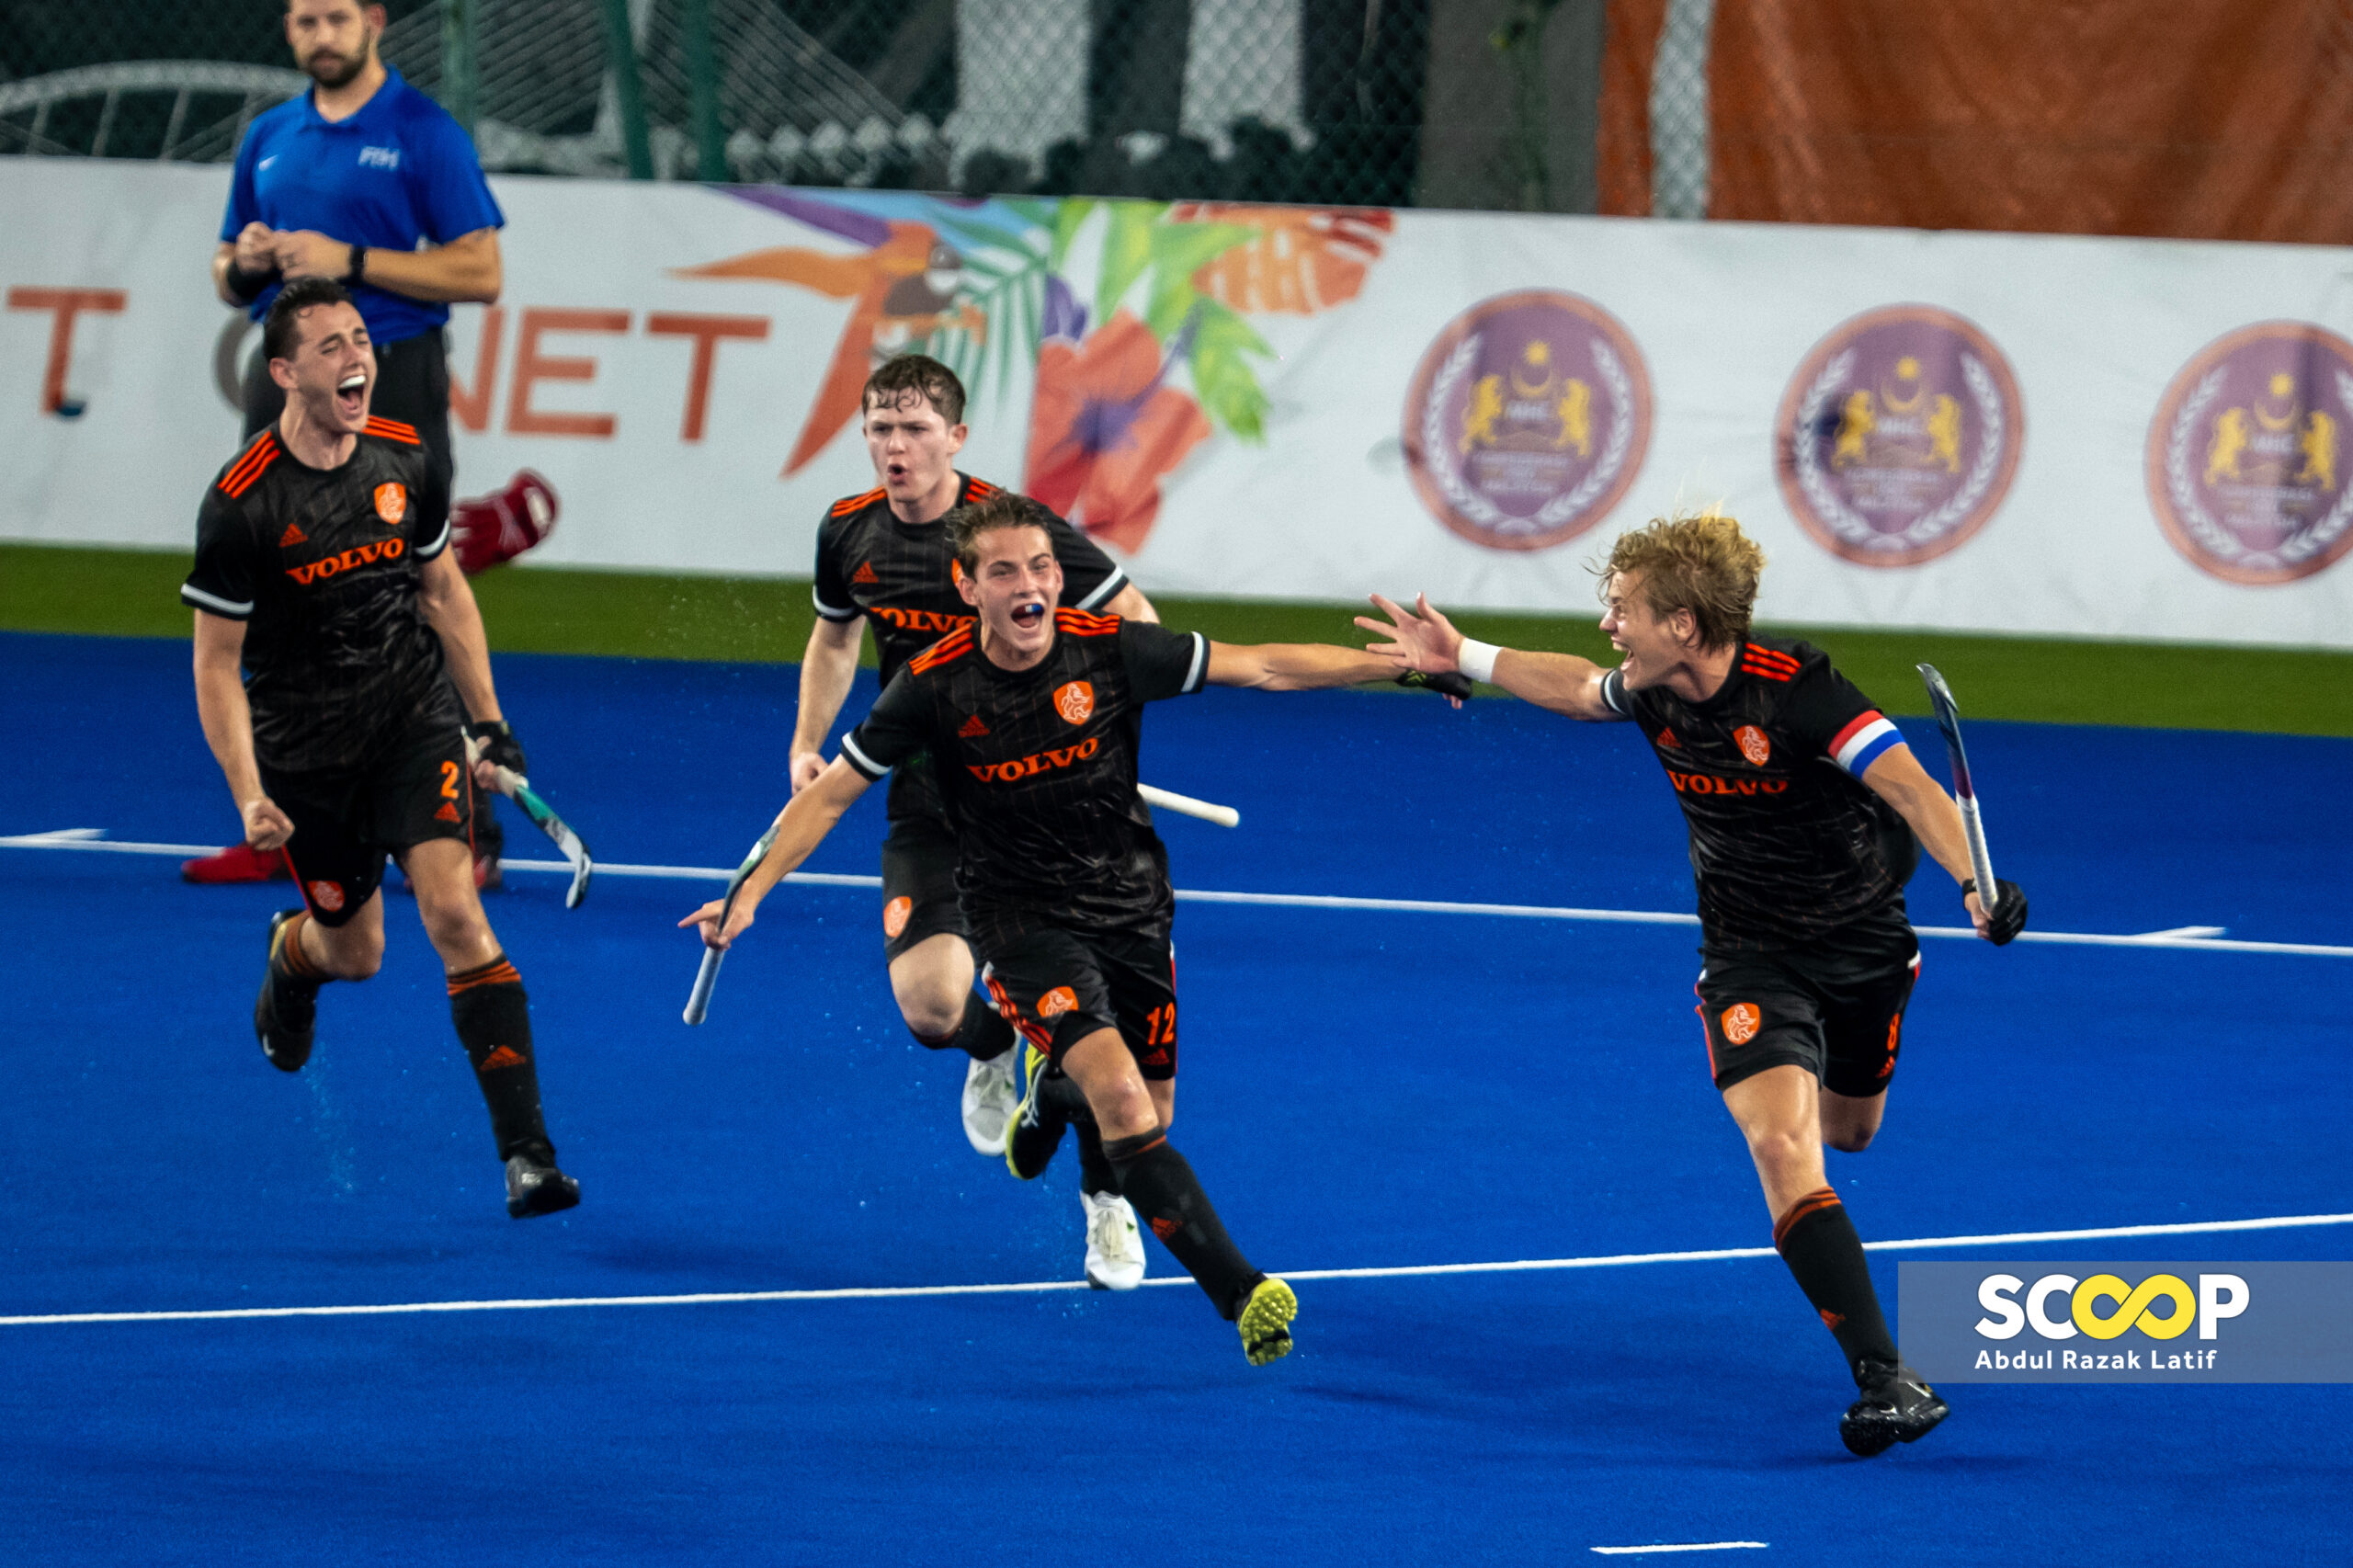 Junior World Cup: Jong Oranje hungry for victory against India